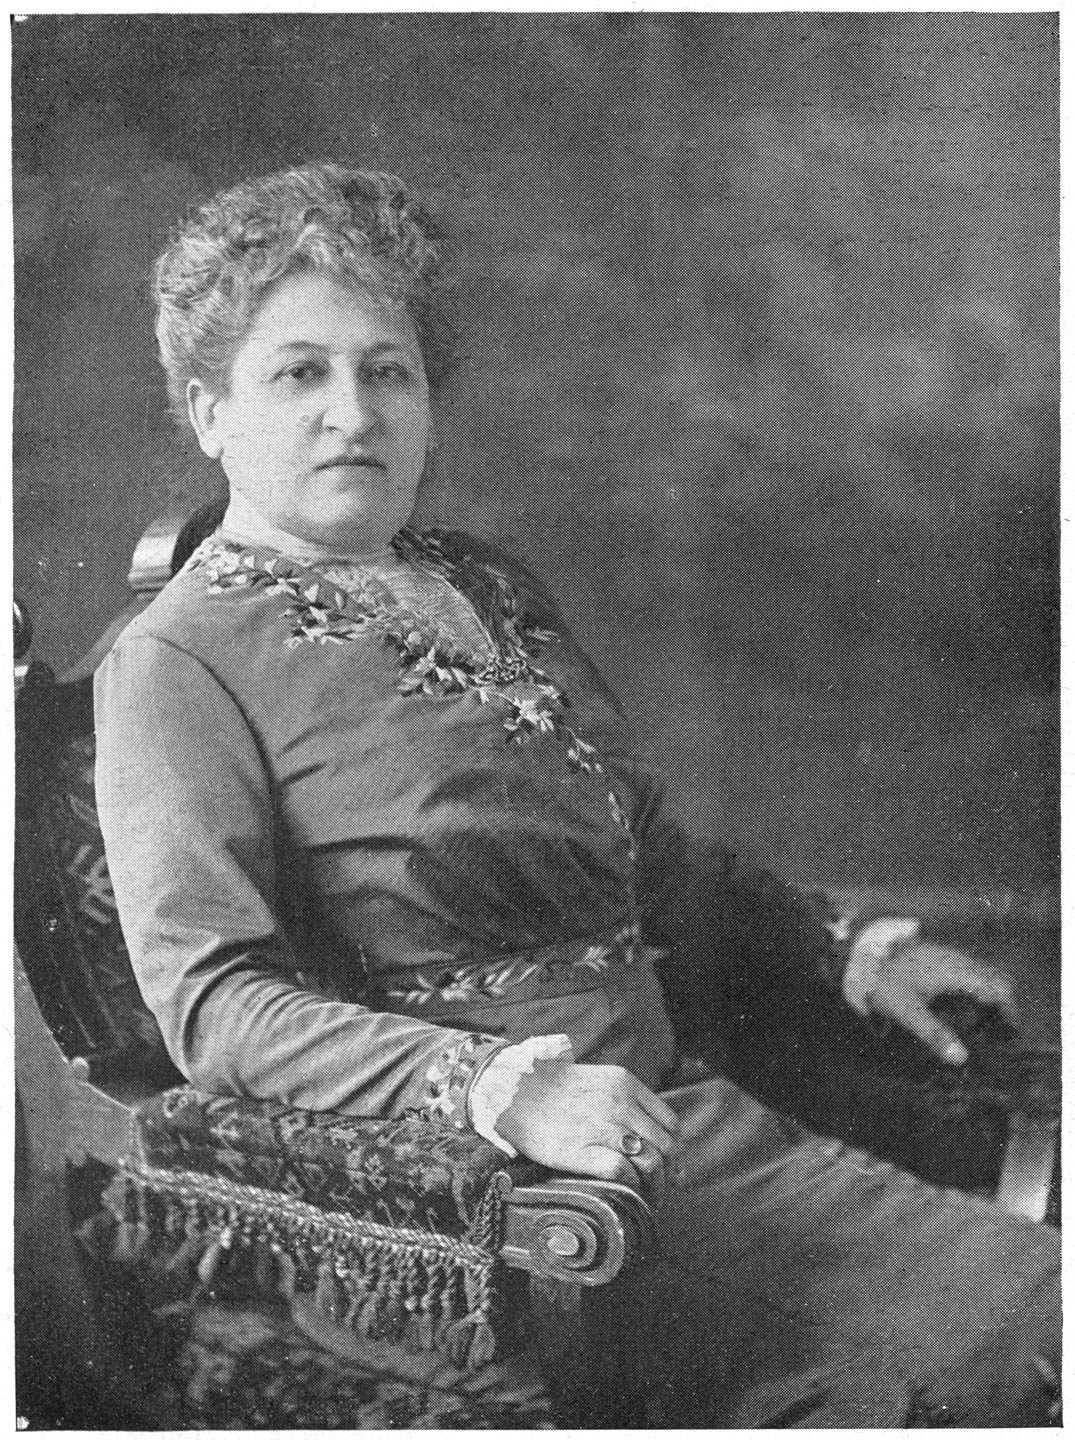 DR. ALETTA H. JACOBS IN 1913